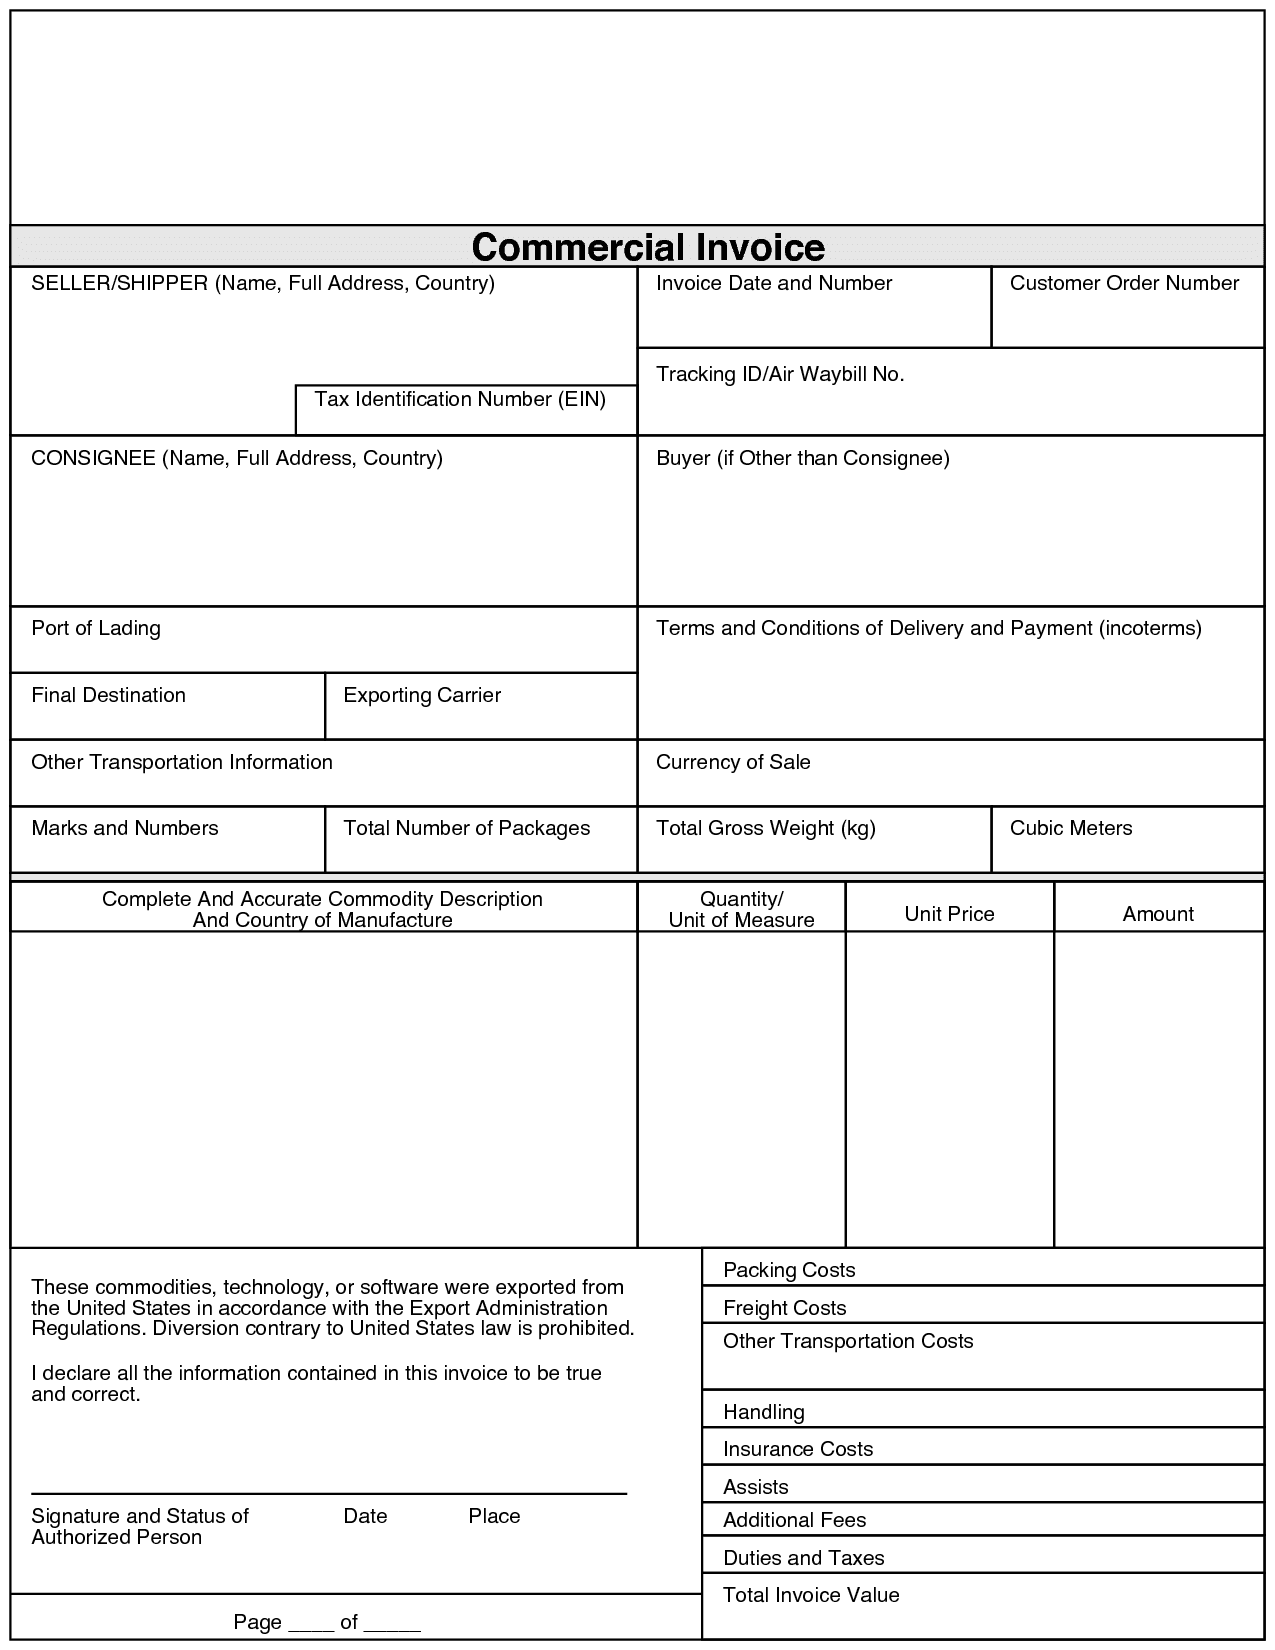 Commercial Invoice Template Fedex